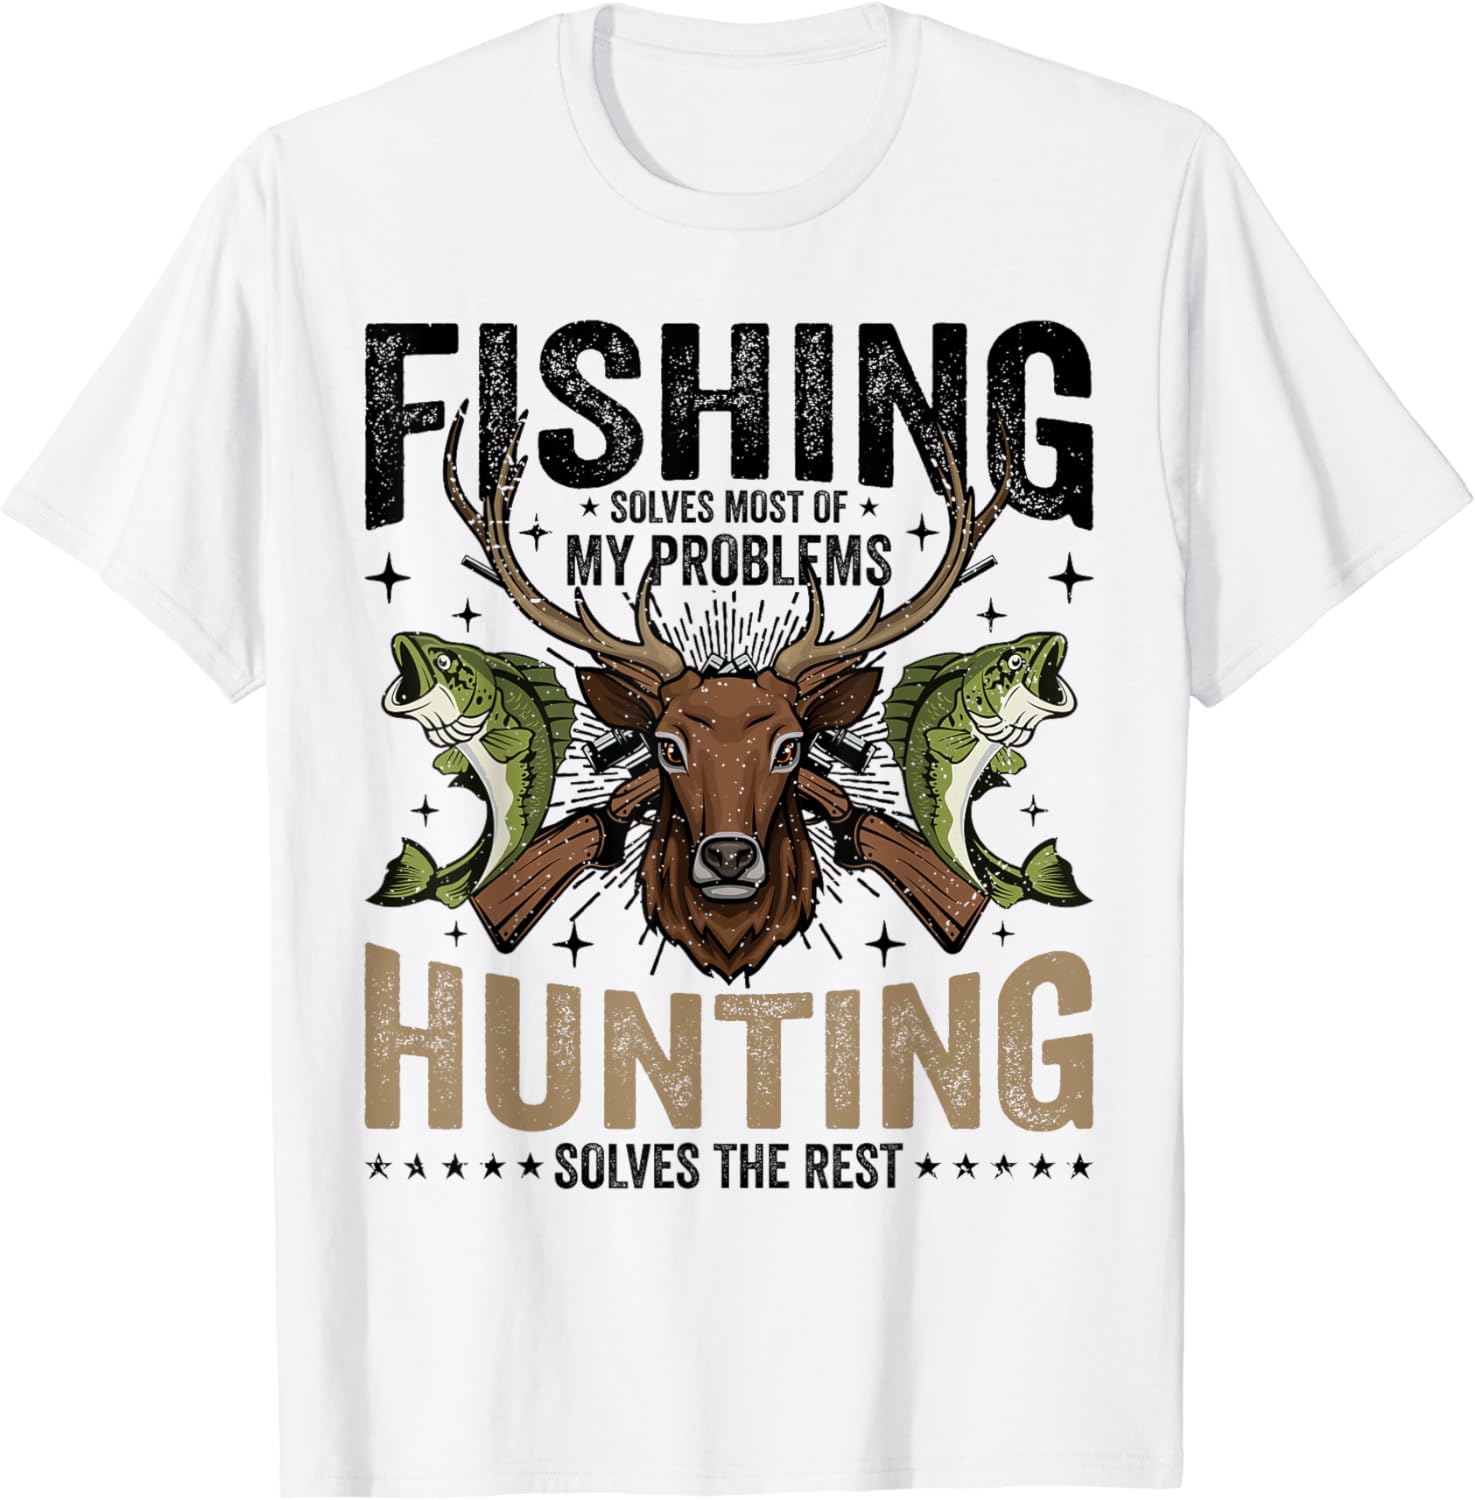 https://www.buytshirtdesigns.net/wp-content/uploads/2024/01/Retro-Fishing-And-Hunting-Gifts-Humor-Hunter-Cool-Funny-T-Shirt.jpg